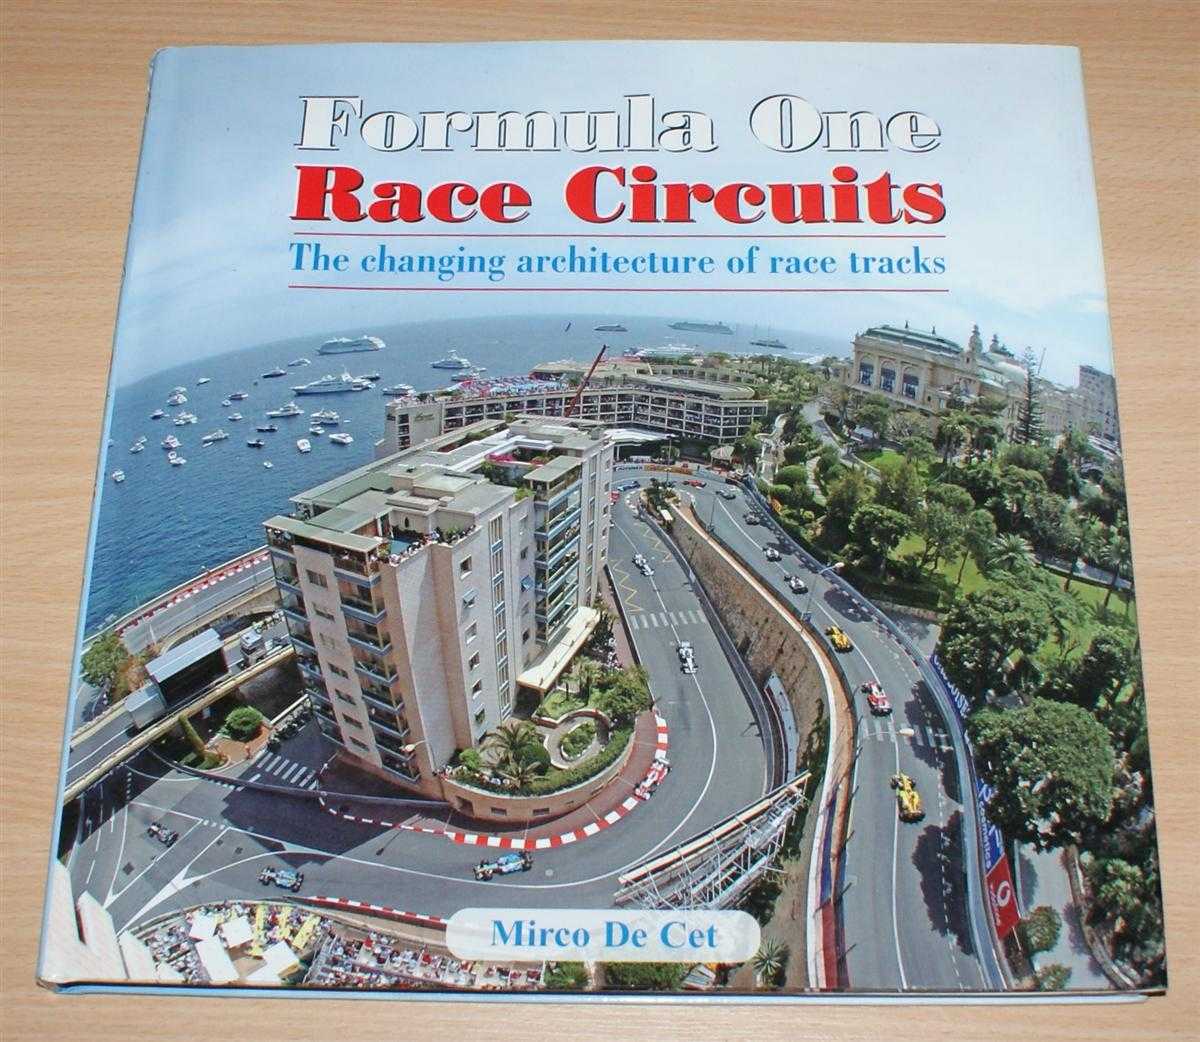 Mirco De Cet - Formula One Race Circuits: The changing architecture of race tracks